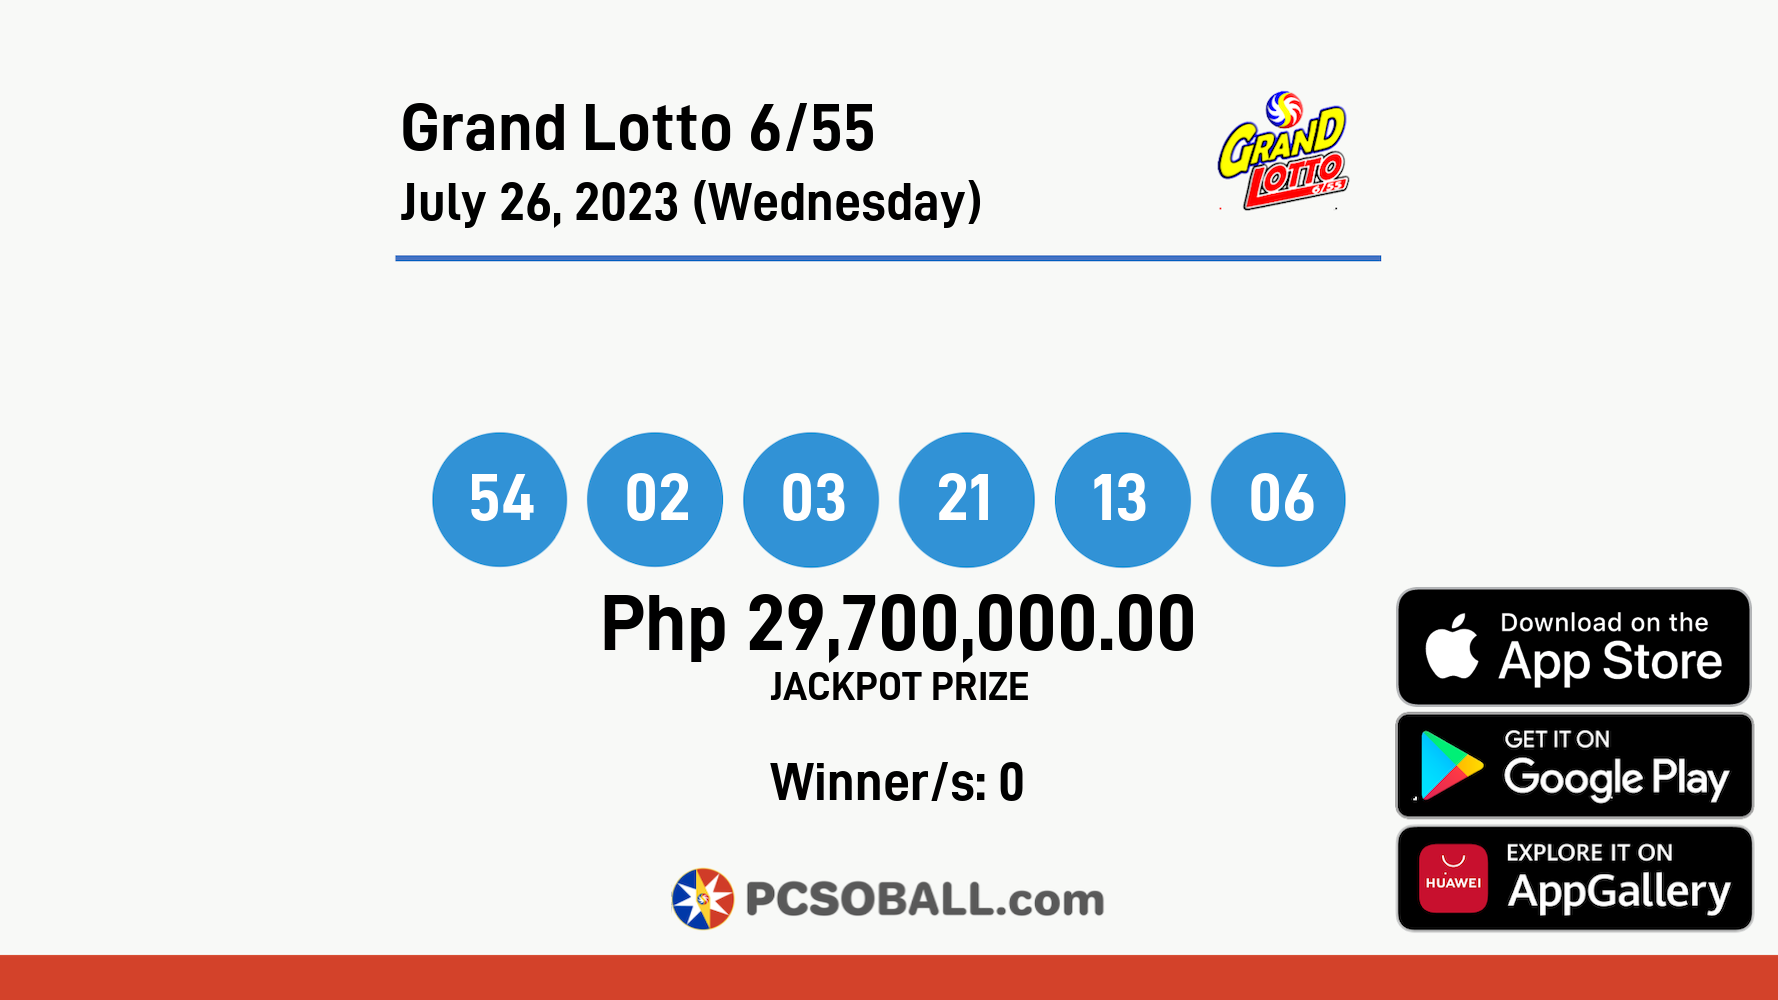 Grand Lotto 6/55 July 26, 2023 (Wednesday) Result